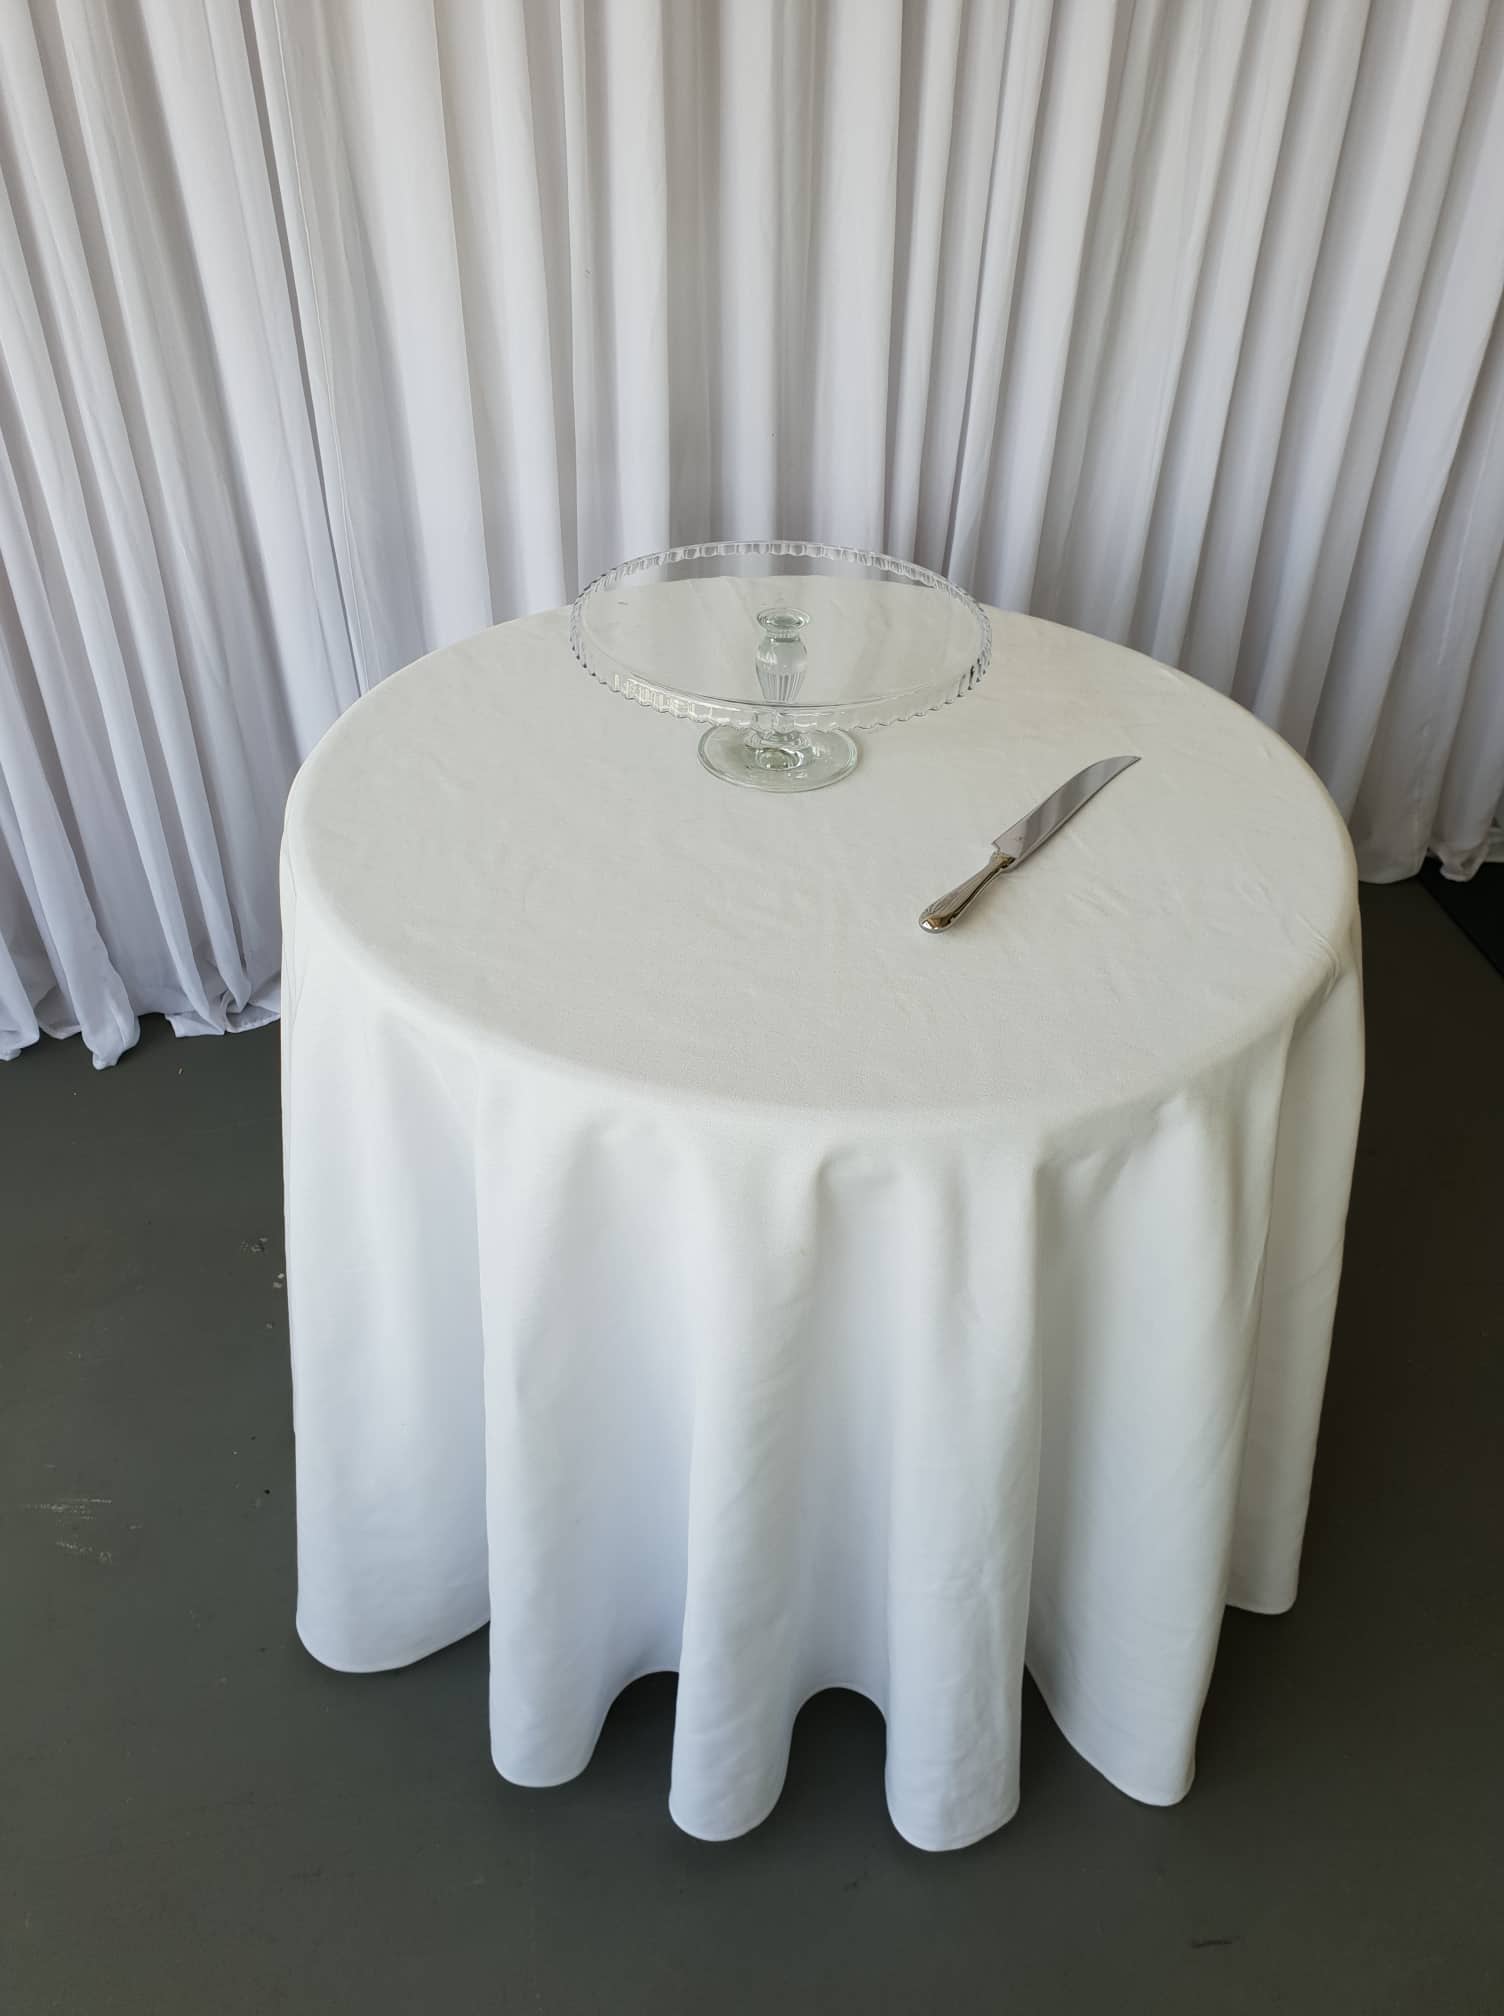 3 foot round table dressed as cake table